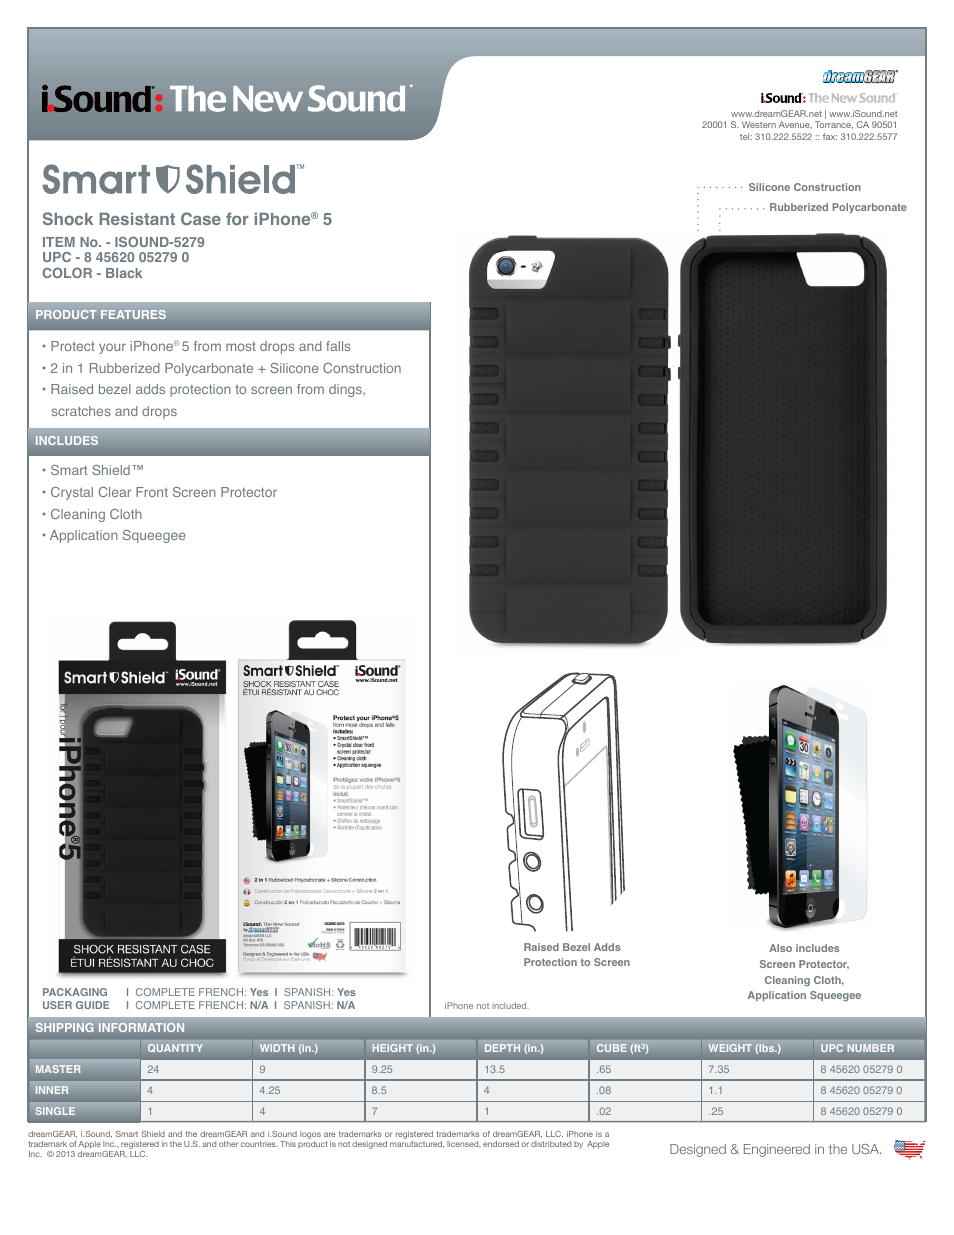 Smart Shield  Shock Resistant Case for iPhone5s - Sell Sheet